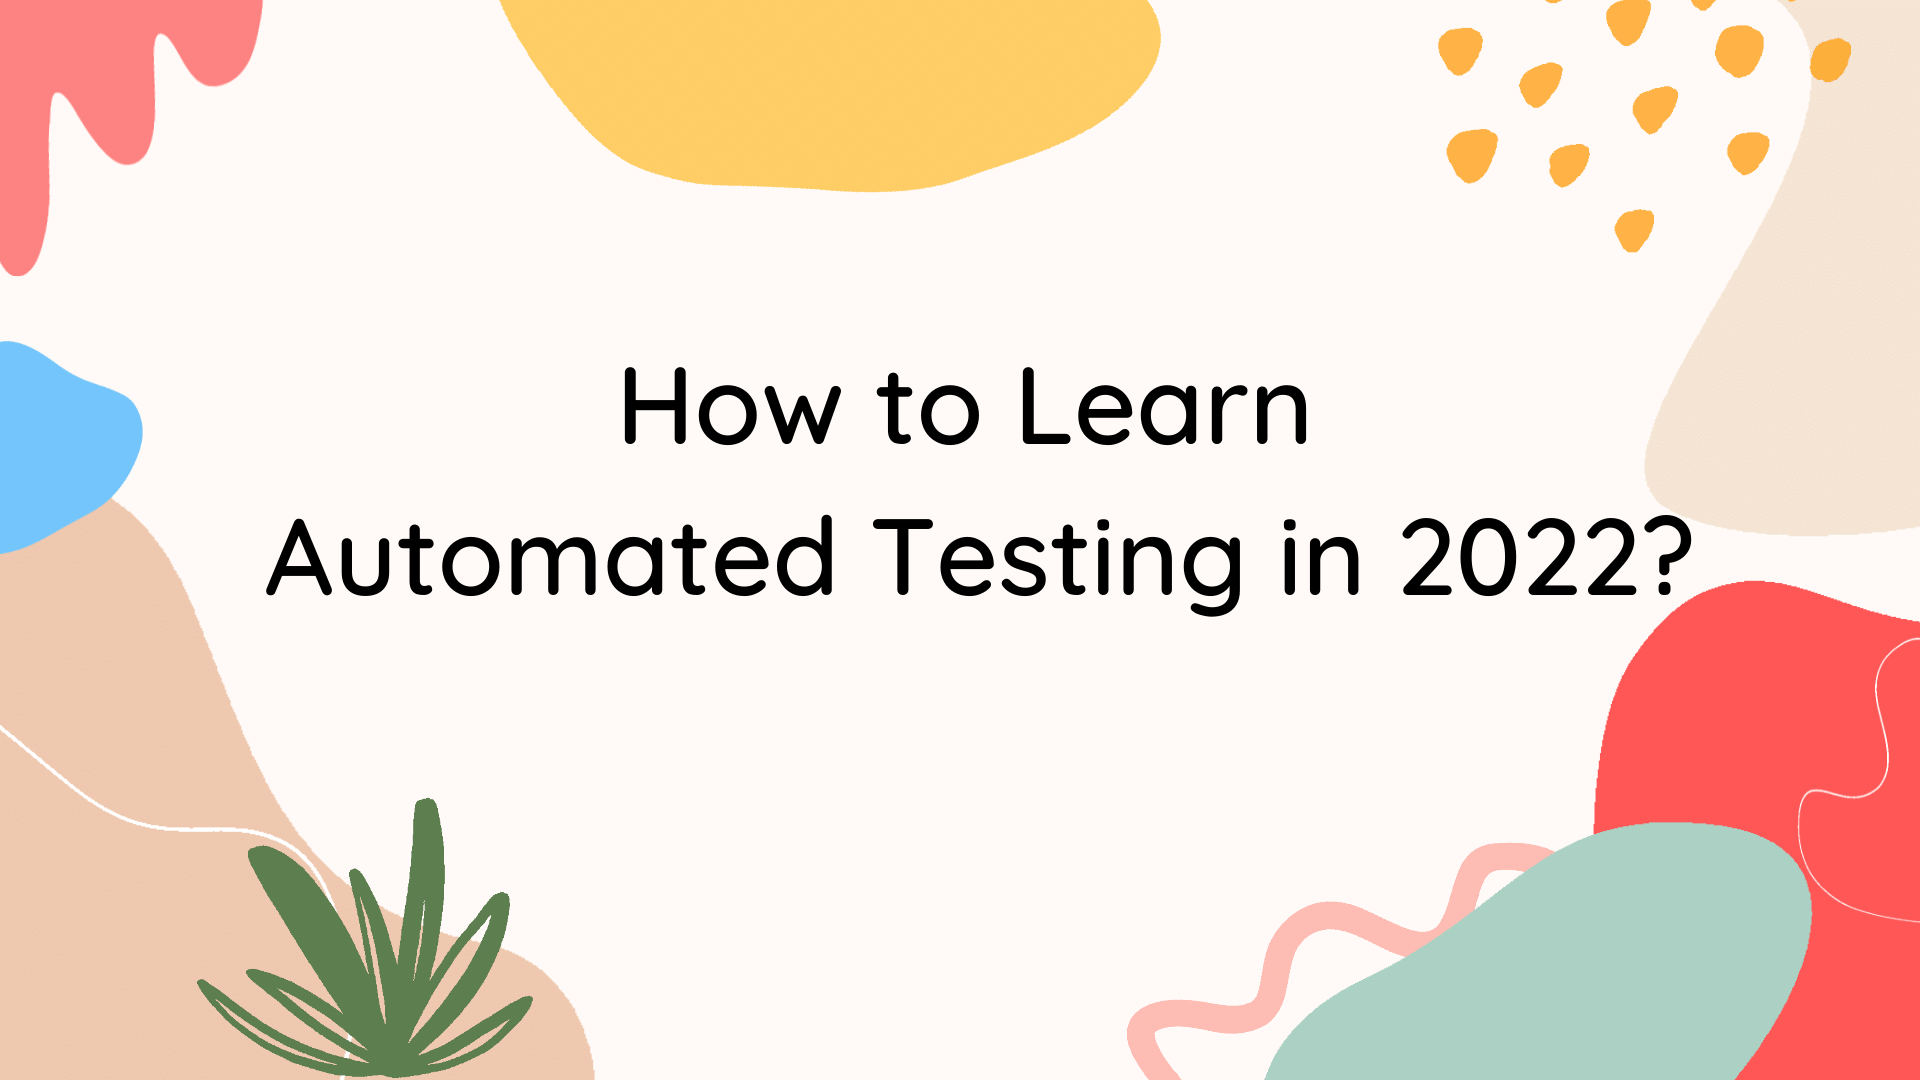 Dissecting Automated Functional Testing — How to Learn Automated Testing in 2022?